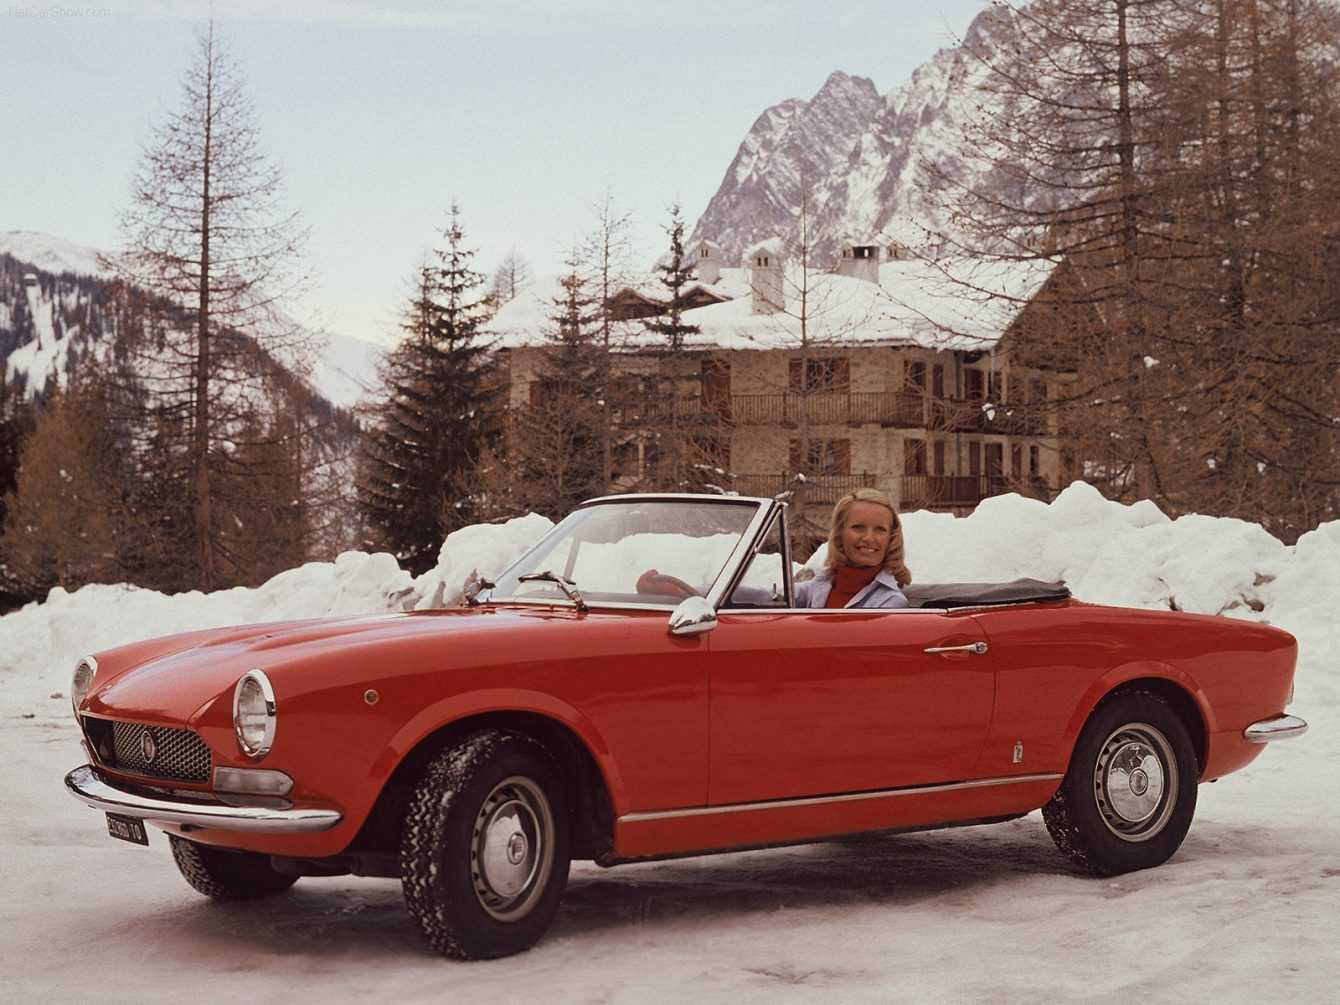 Vintage cars: a great Italian passion according to AutoScout24